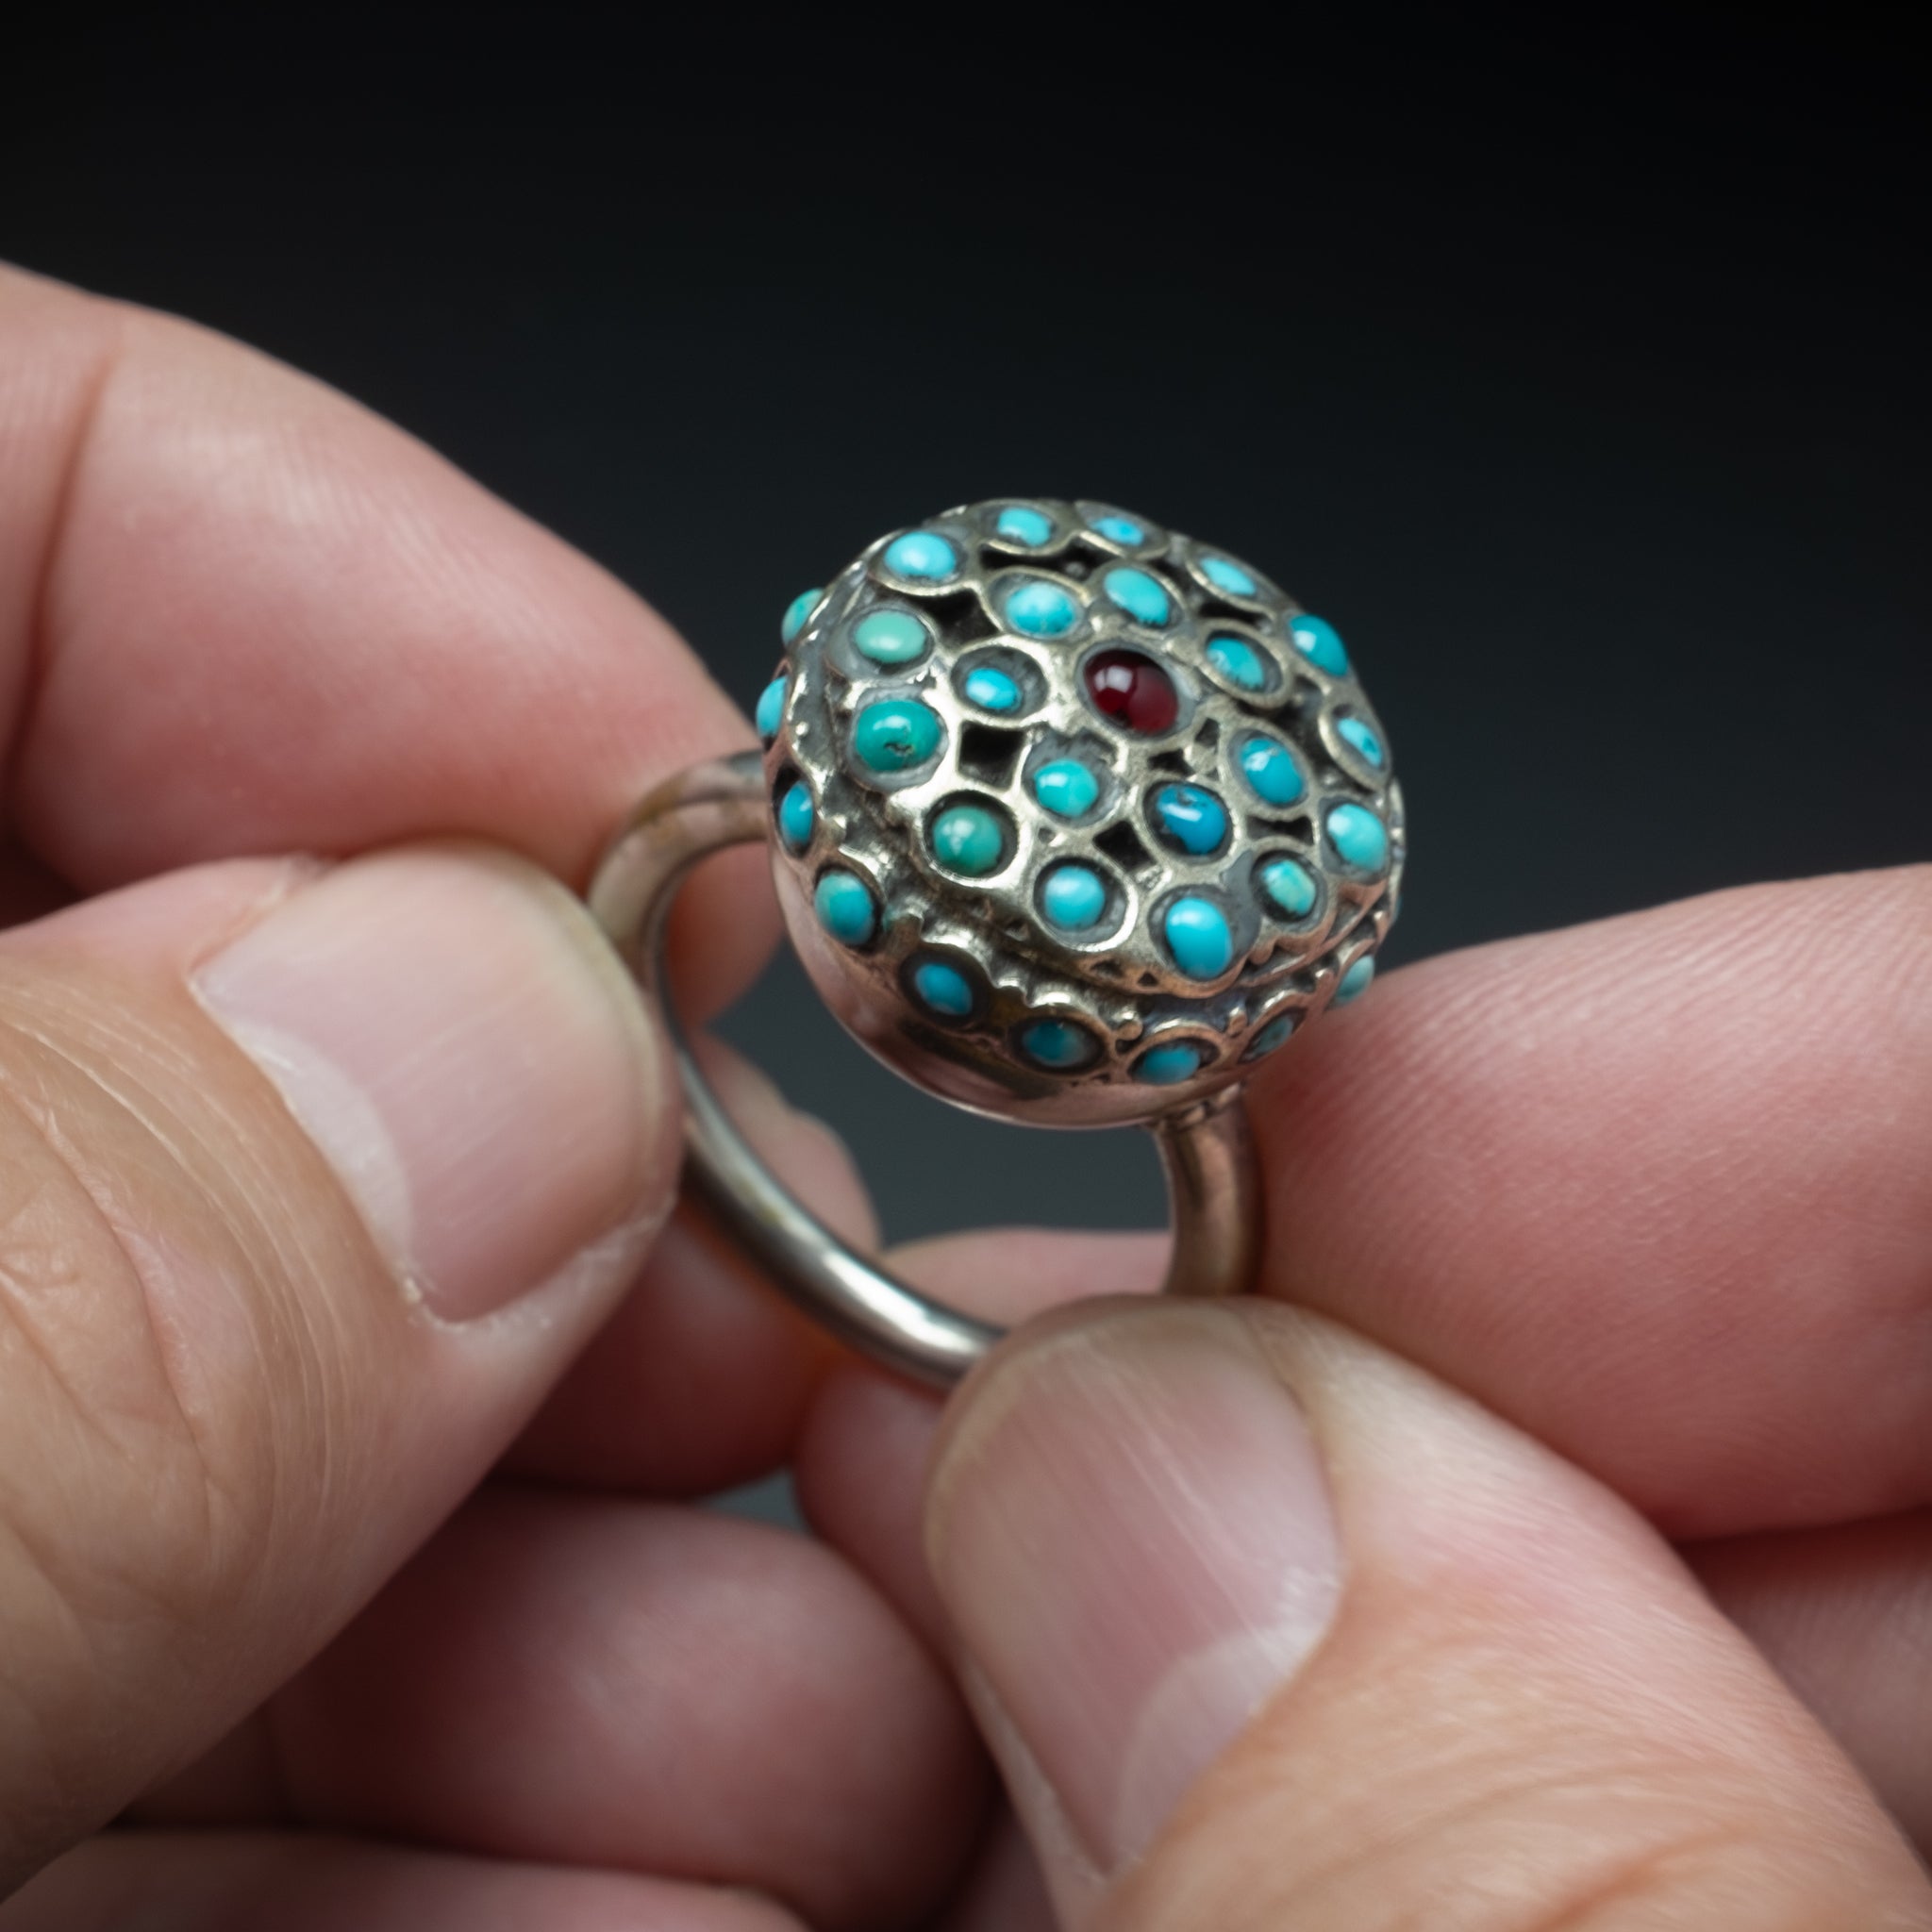 Vintage Silver and turquoise Ring